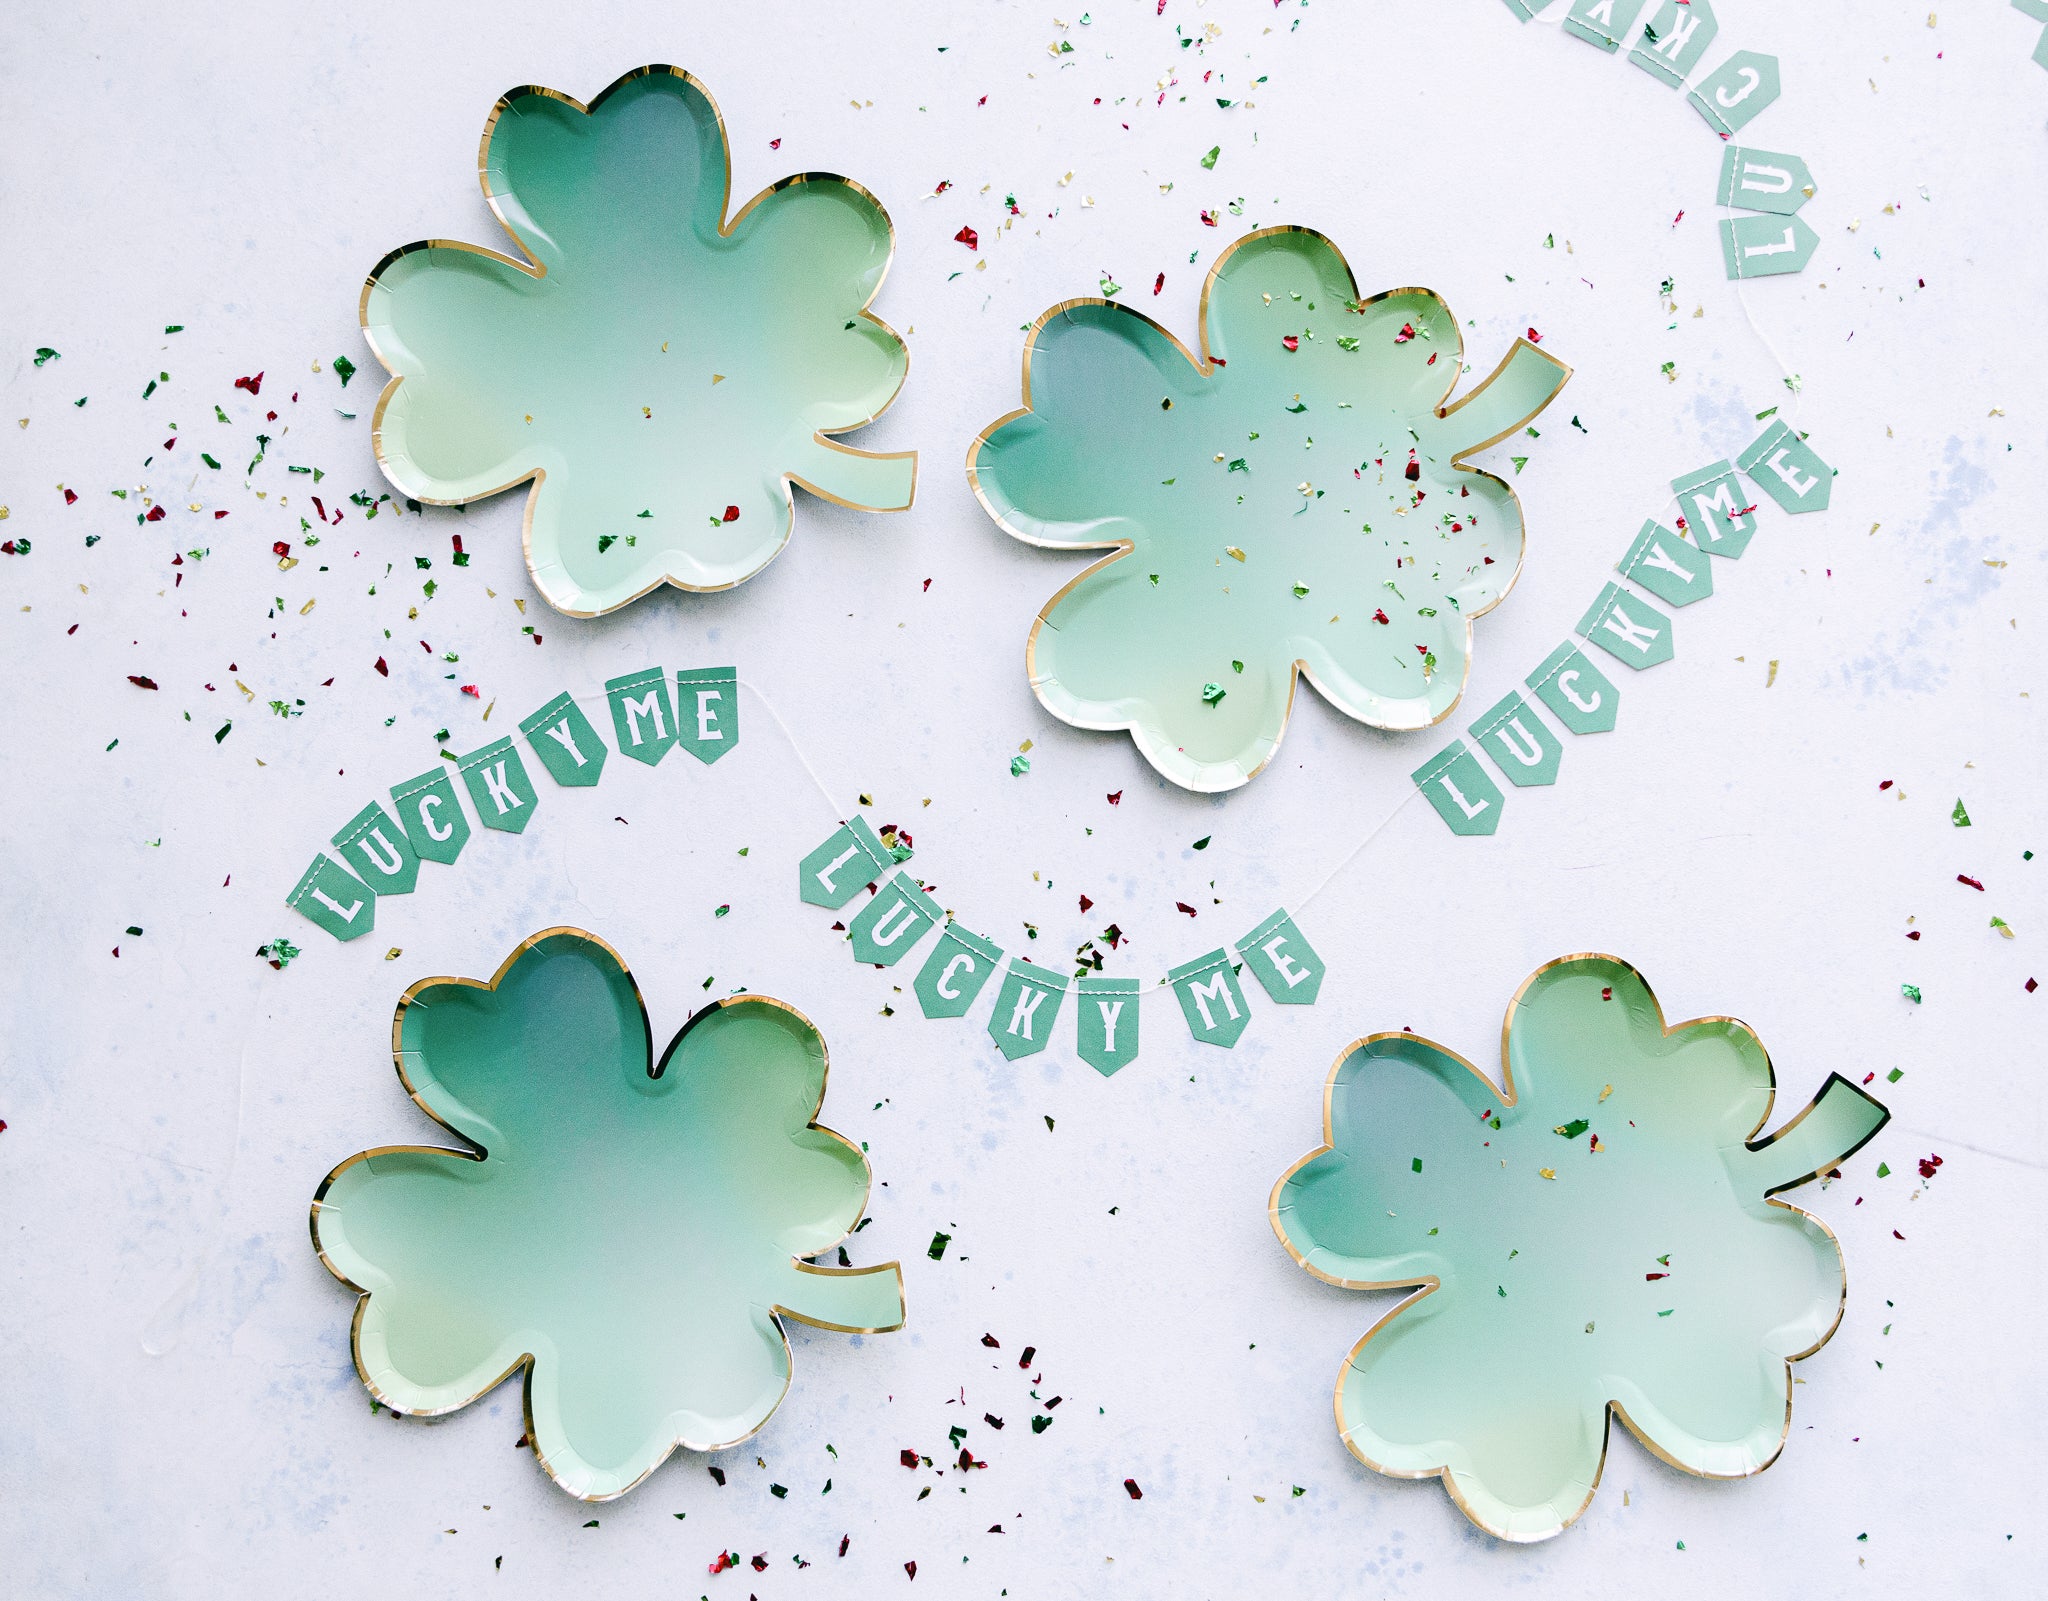 St. Patrick's Day tableware set-up with clover leaf plates